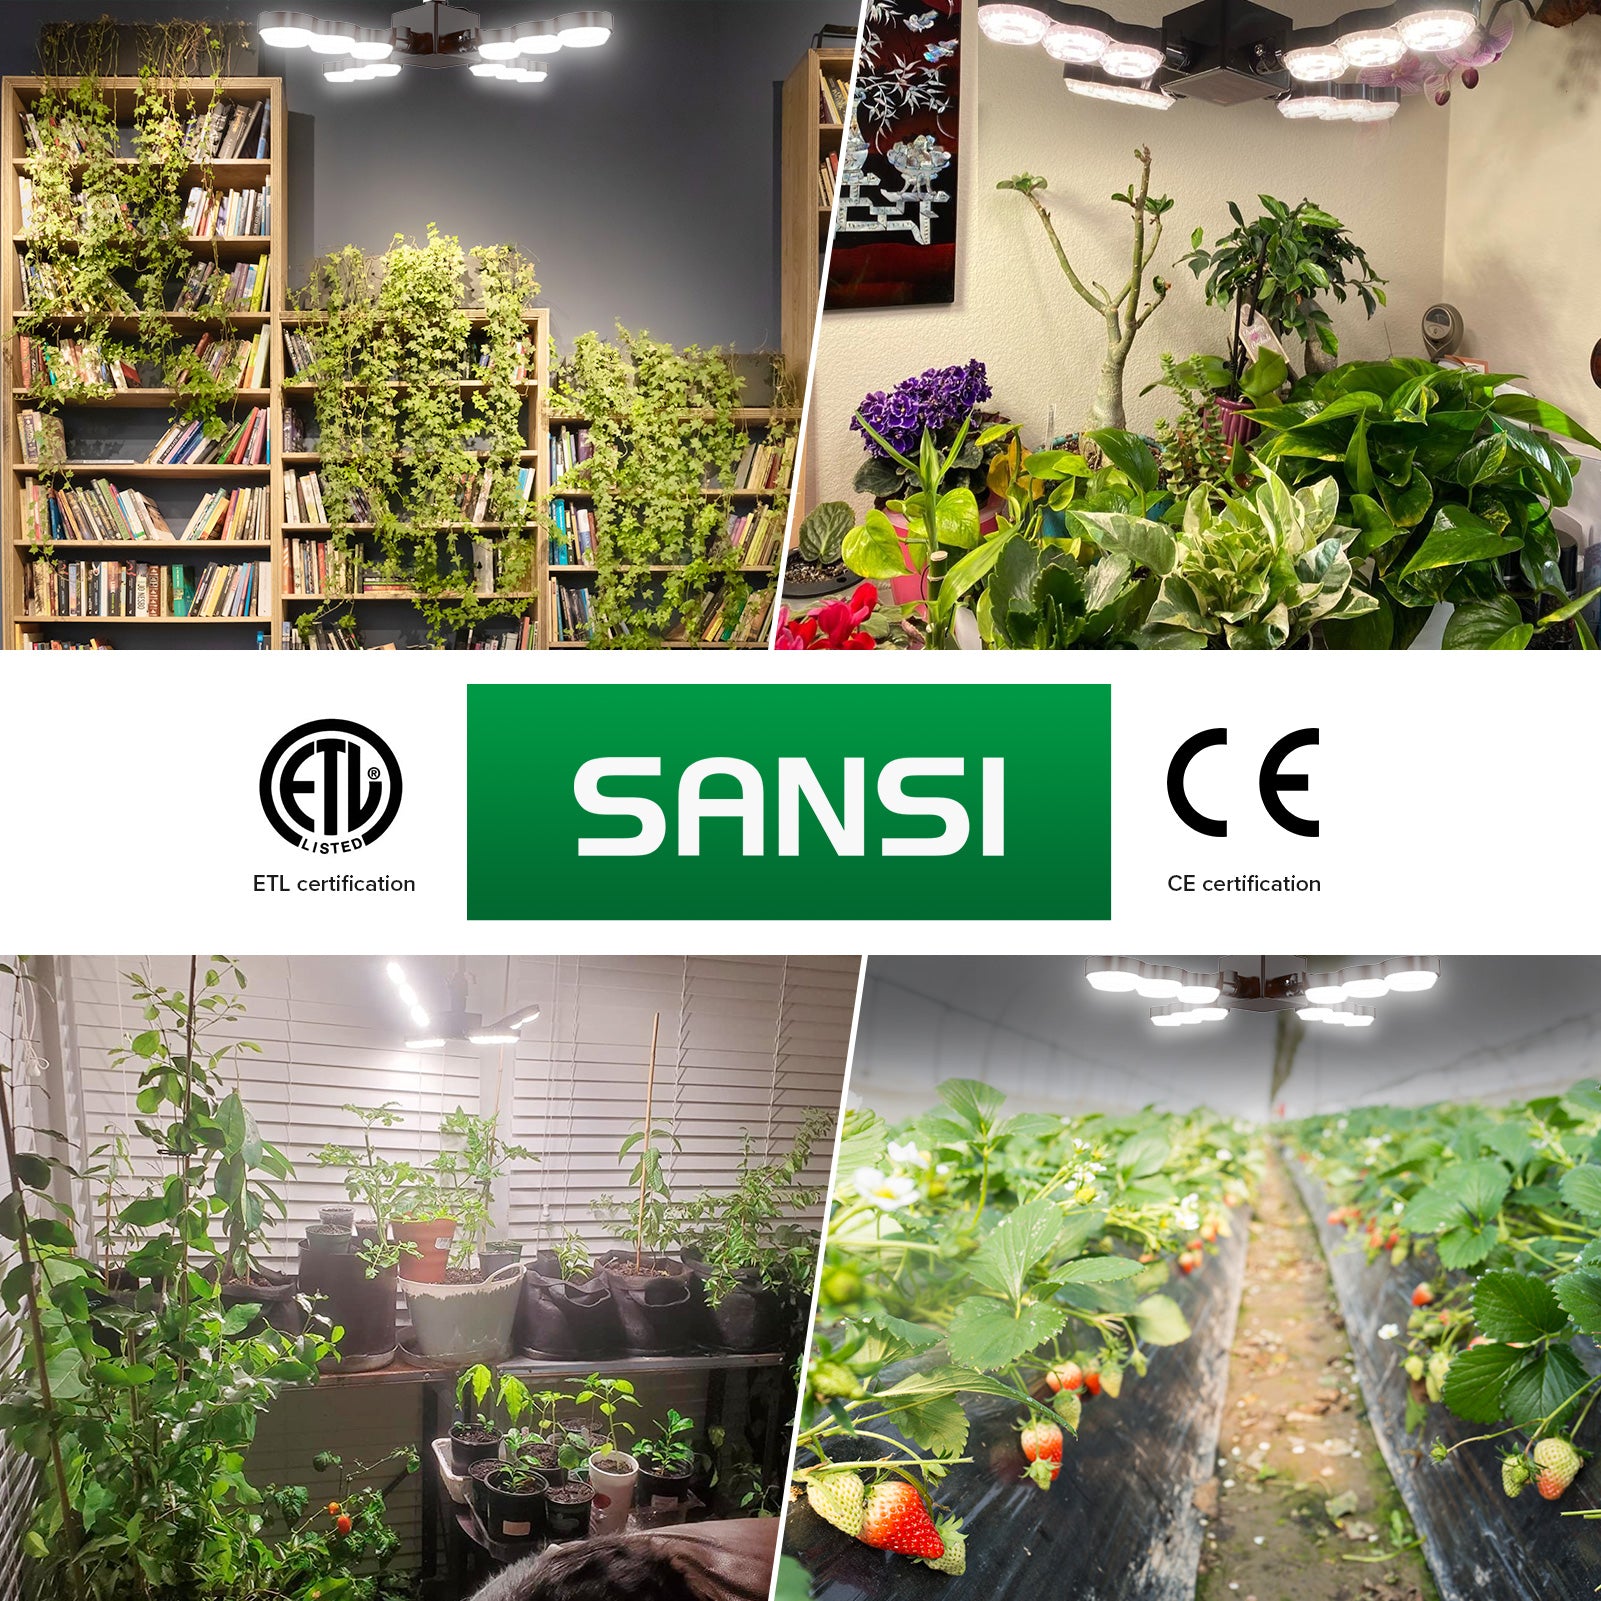 60W grow lamps for indoor plants with folding wings and hook has ETL certification and CE certification